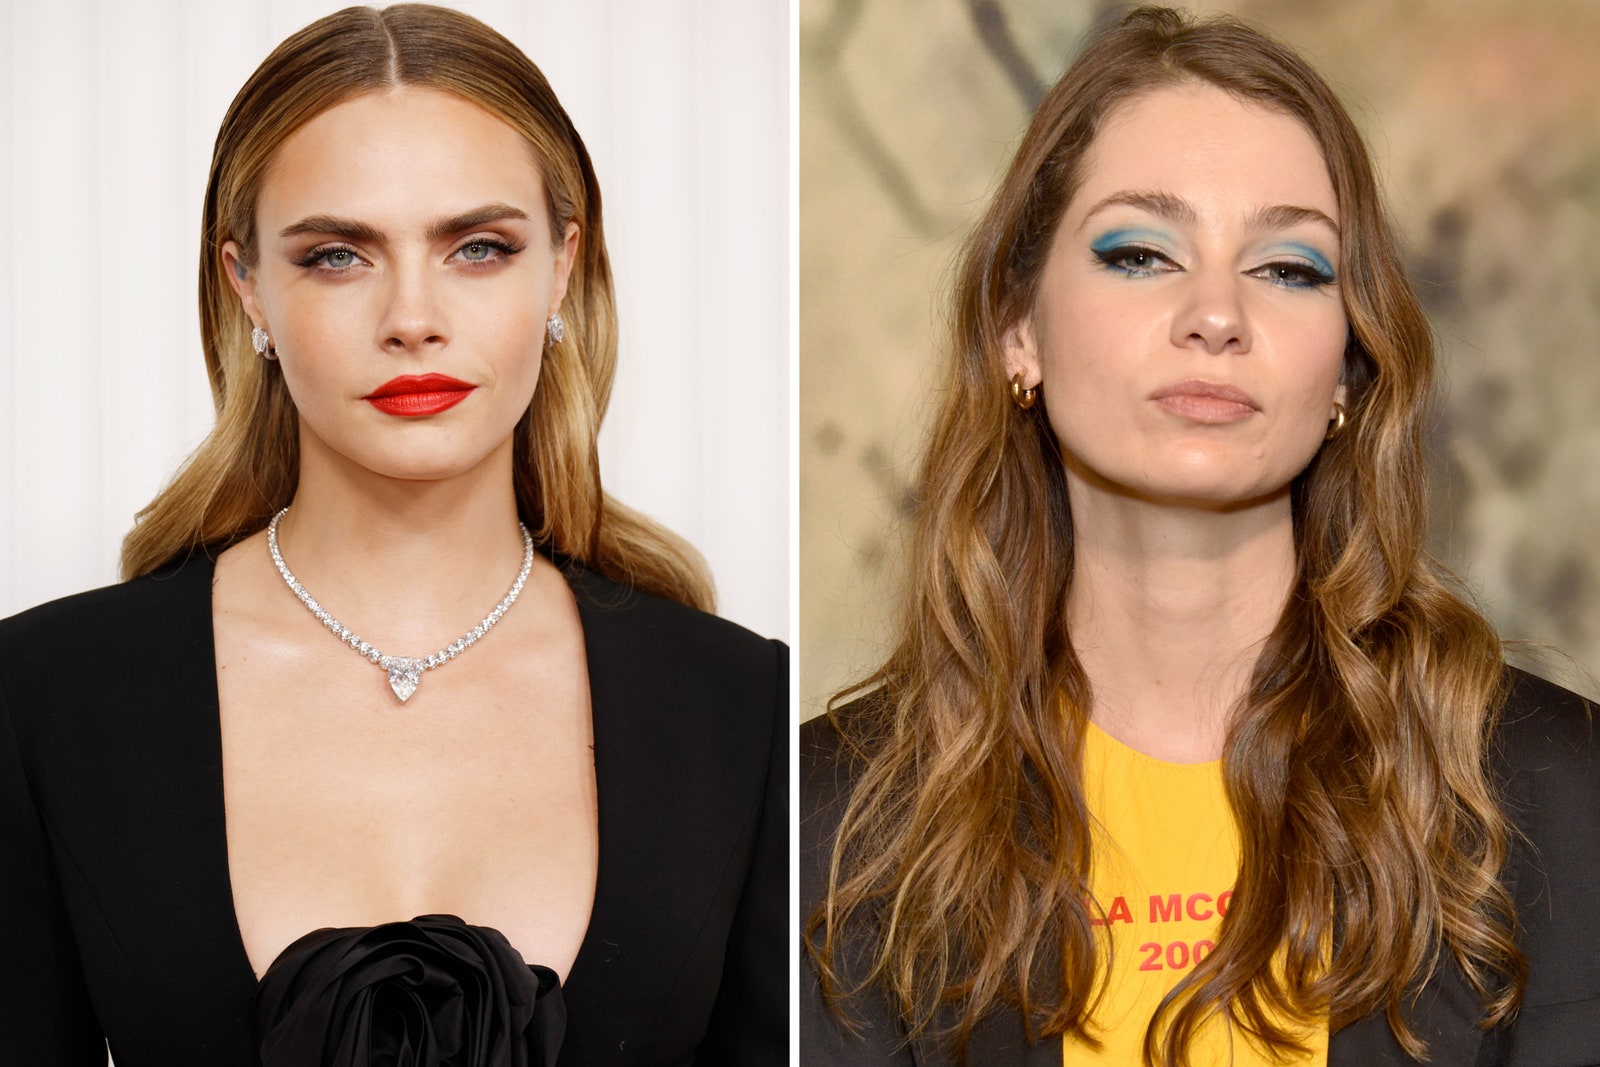 Cara Delevingne Gushed About Her New Girlfriend, the British Musician